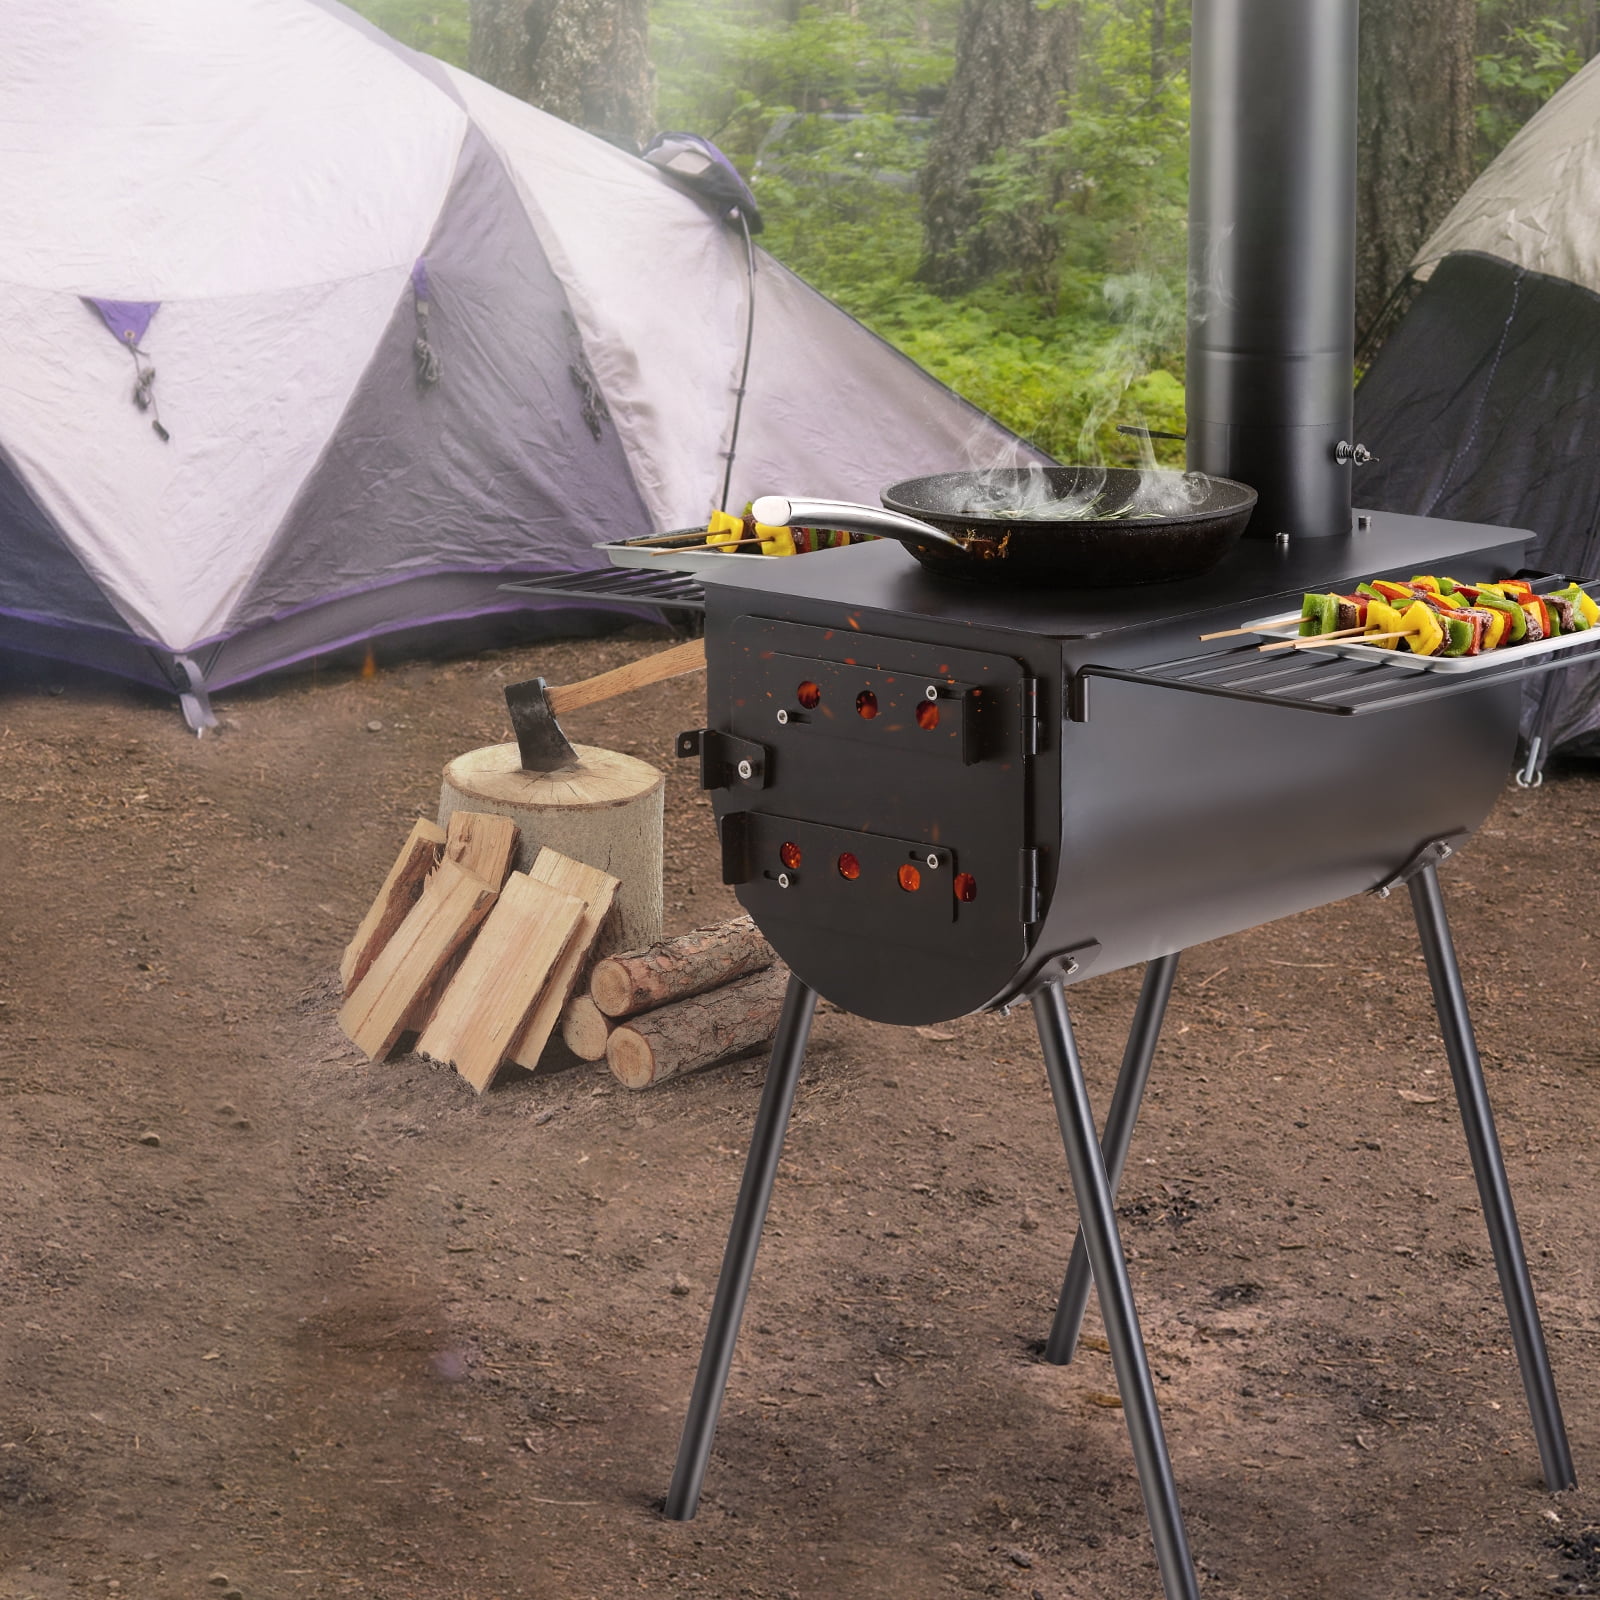 Baker Hot Tent Stove, Camping Fireplace for Hot Tent Camping